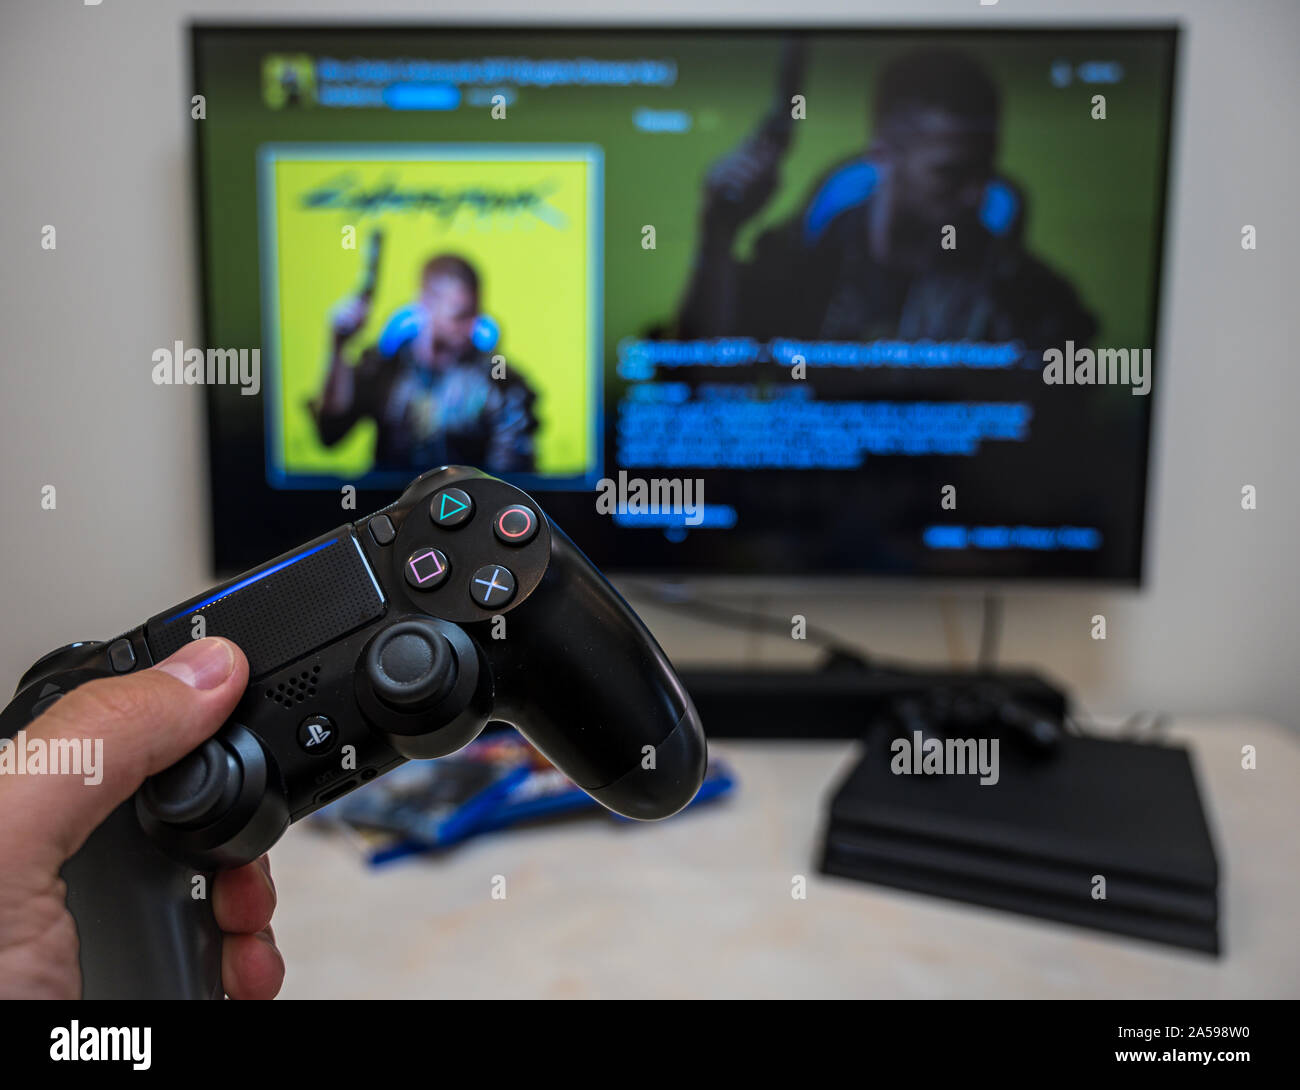 Pre-order, download, play Sony Play Station 4 Pro game Cyberpunk 2077 on the big LCD screen at home. Controller in the hand. Stock Photo